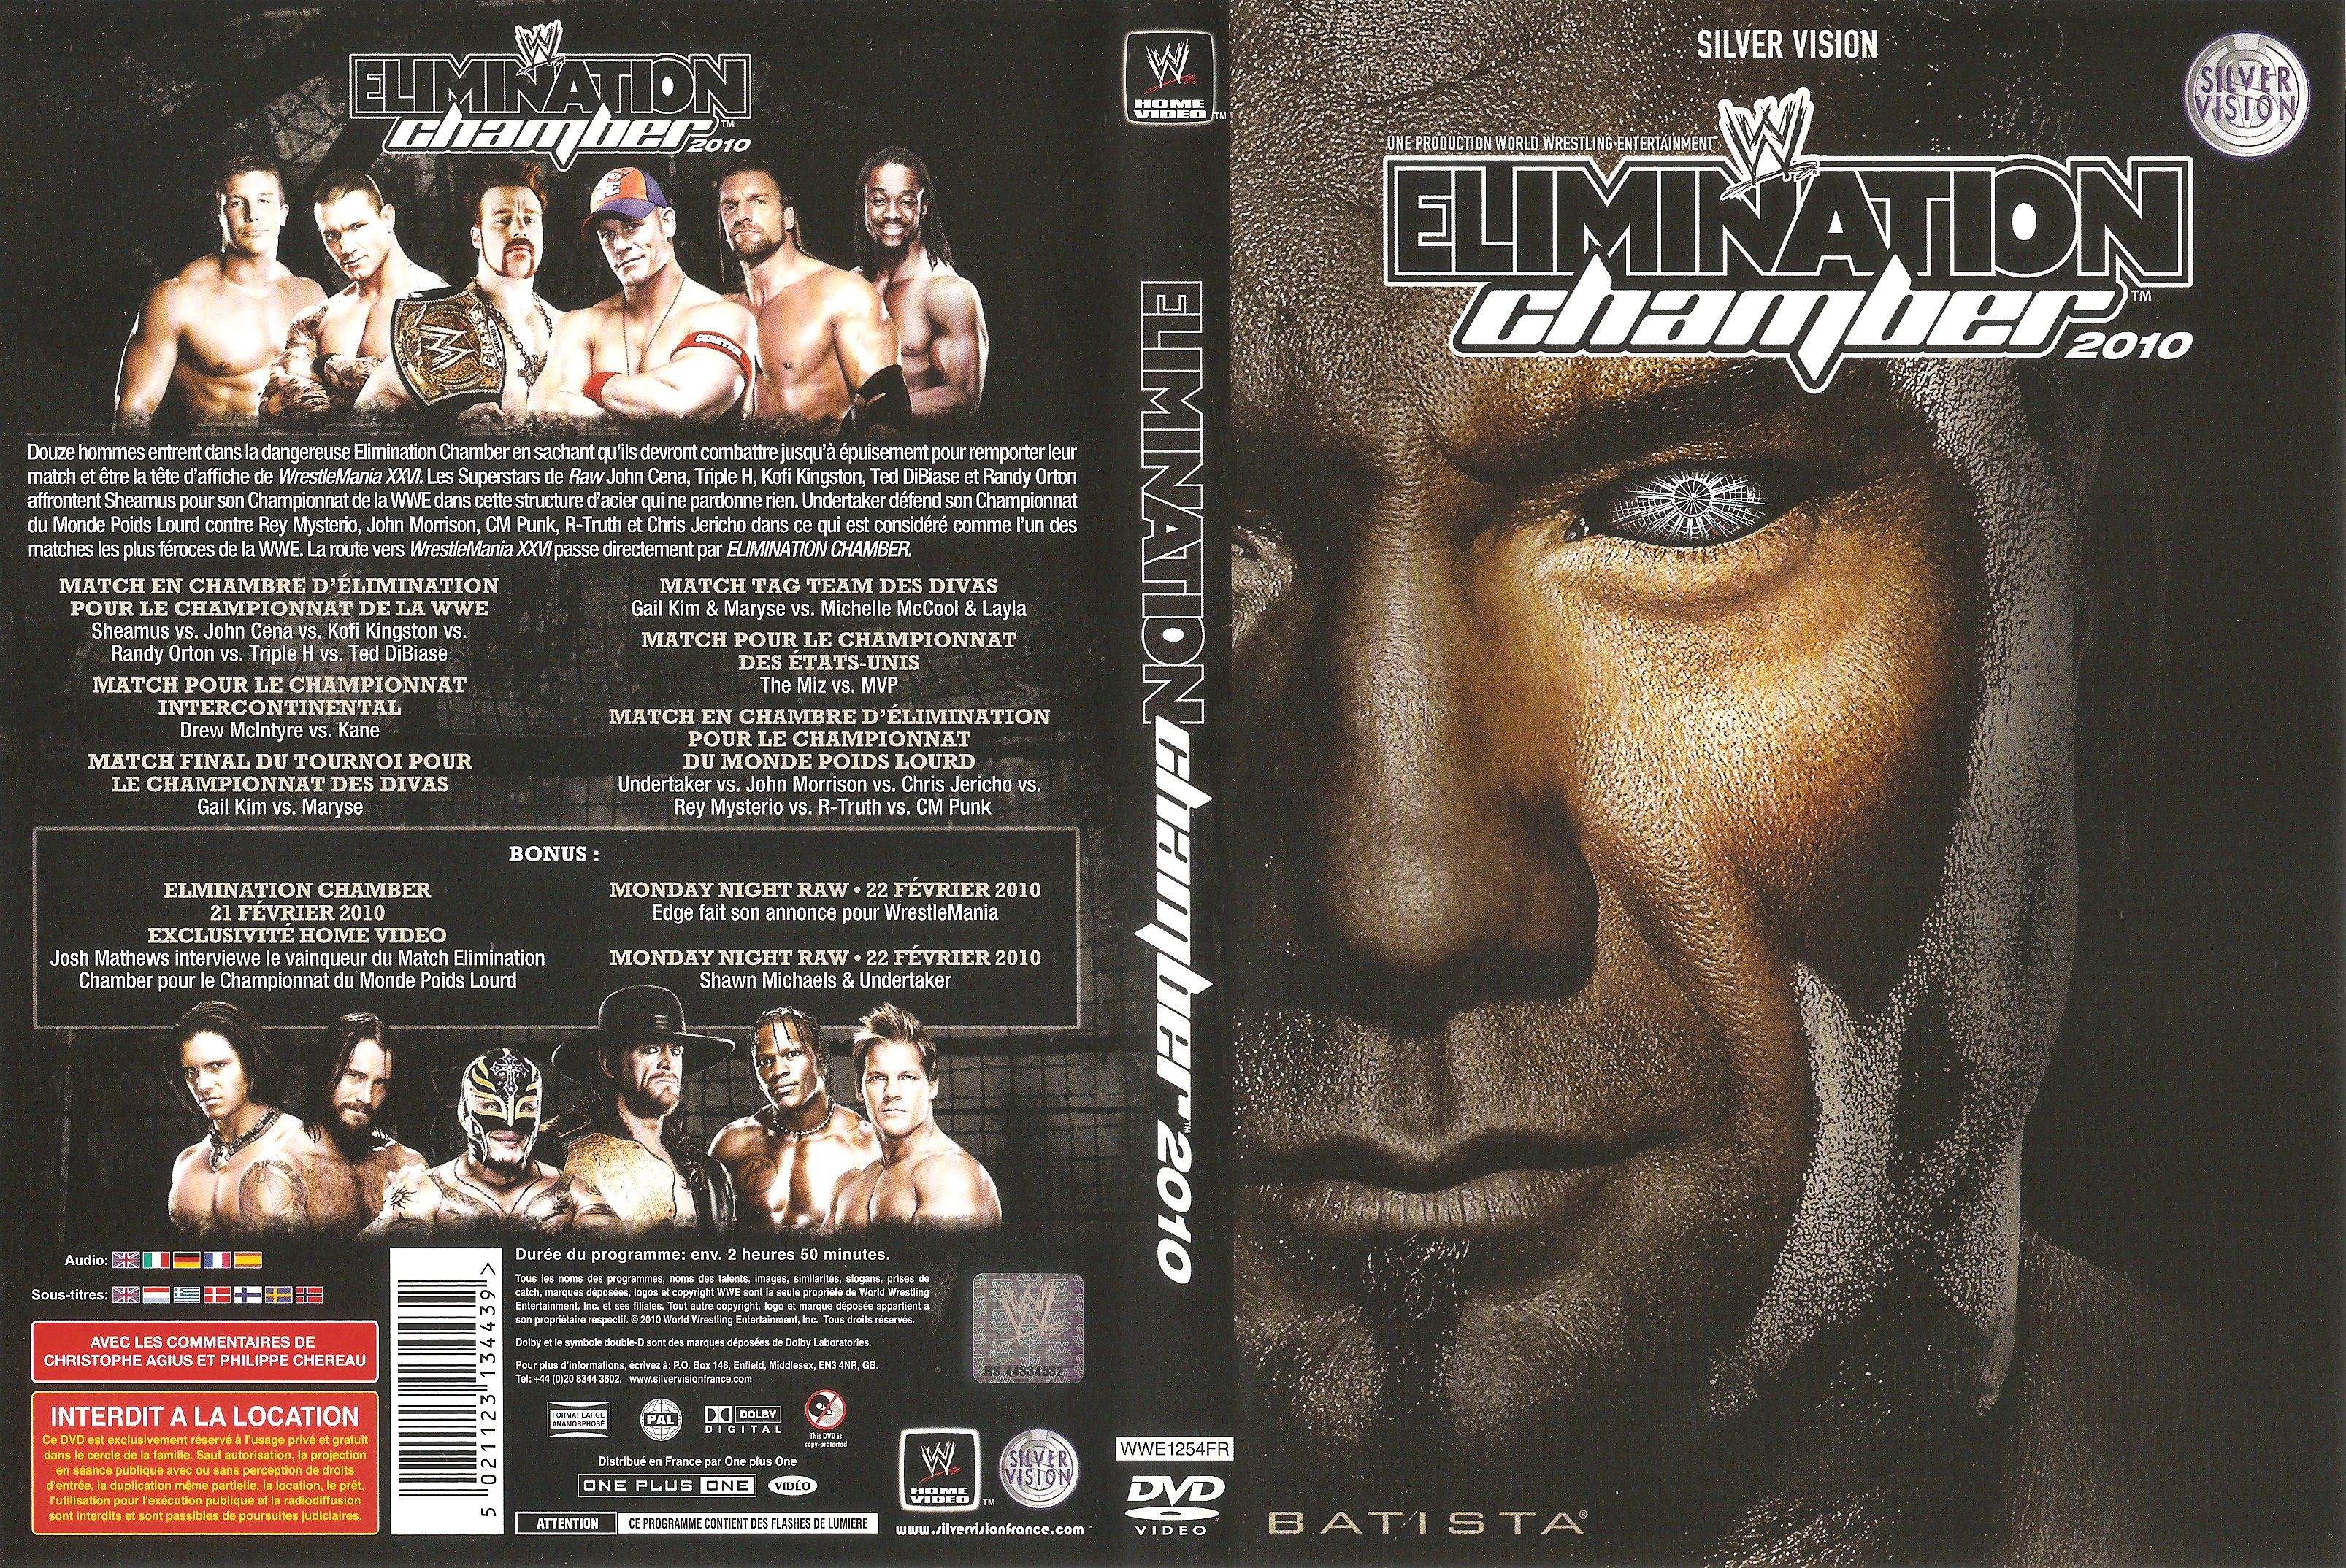 Jaquette DVD WWE Elimination Chamber 2010